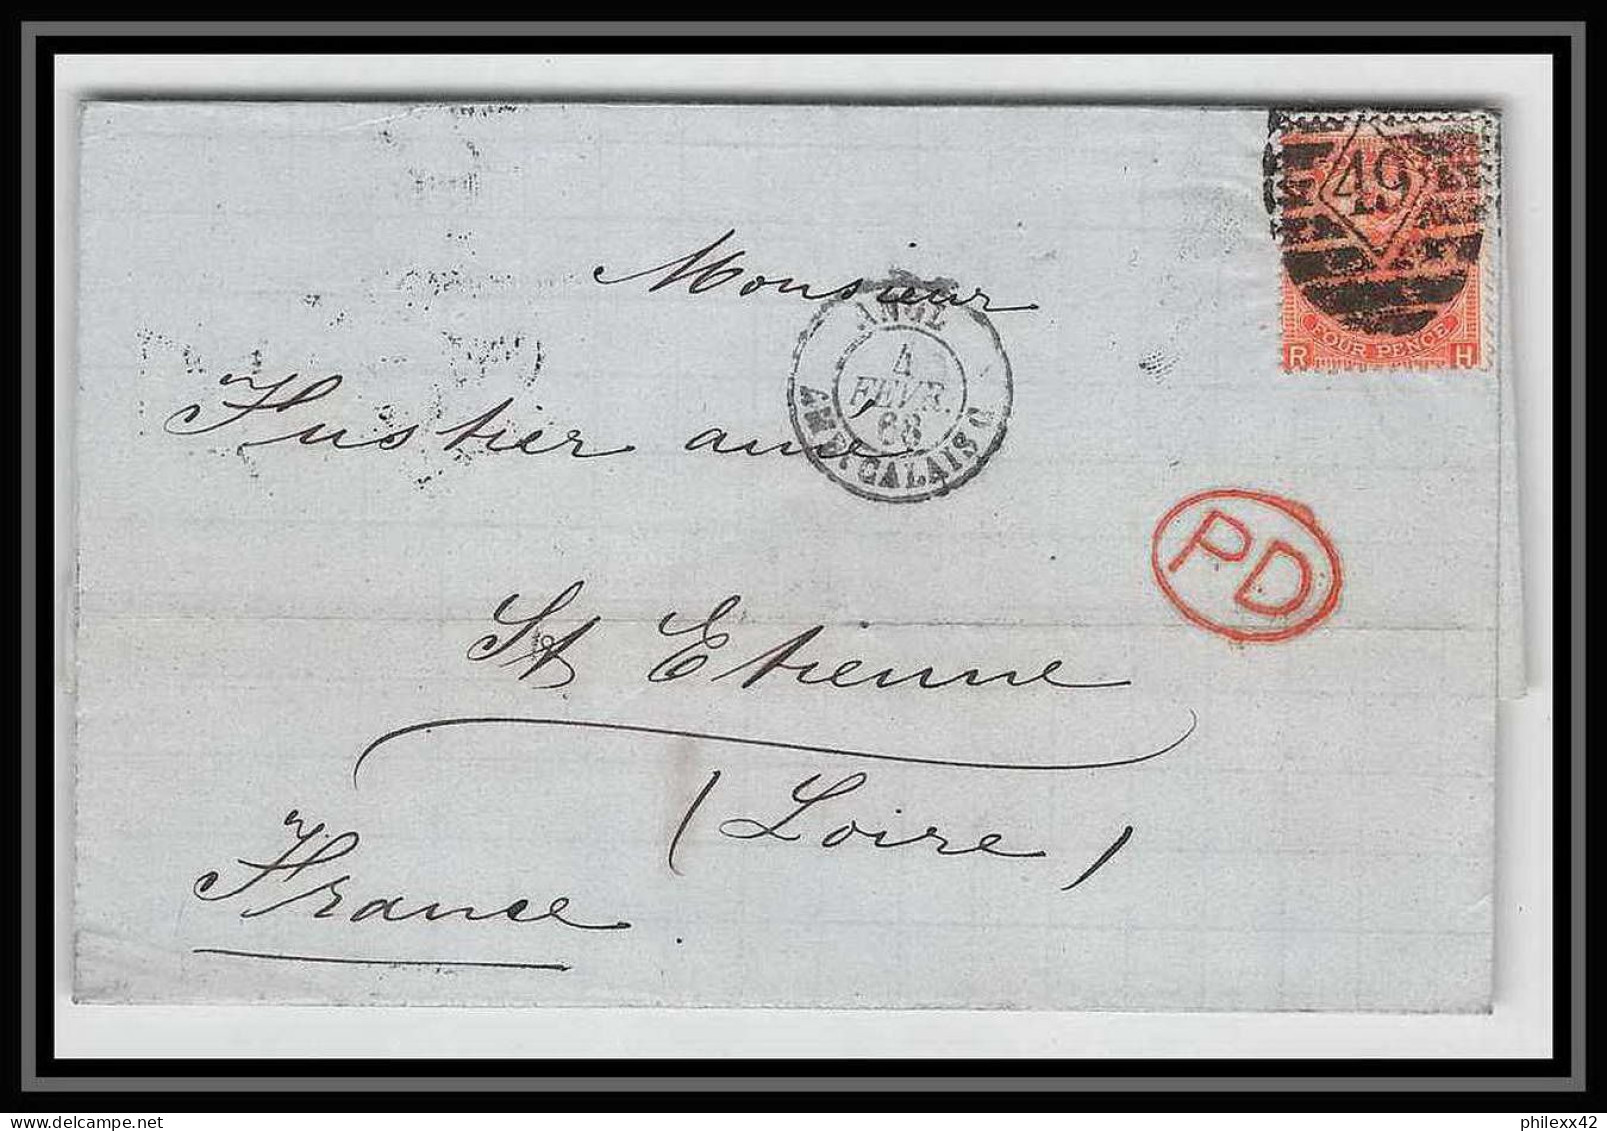 35681 N°32 Victoria 4p Red London St Etienne France 1867 Cachet 49 Lettre Cover Grande Bretagne England - Covers & Documents